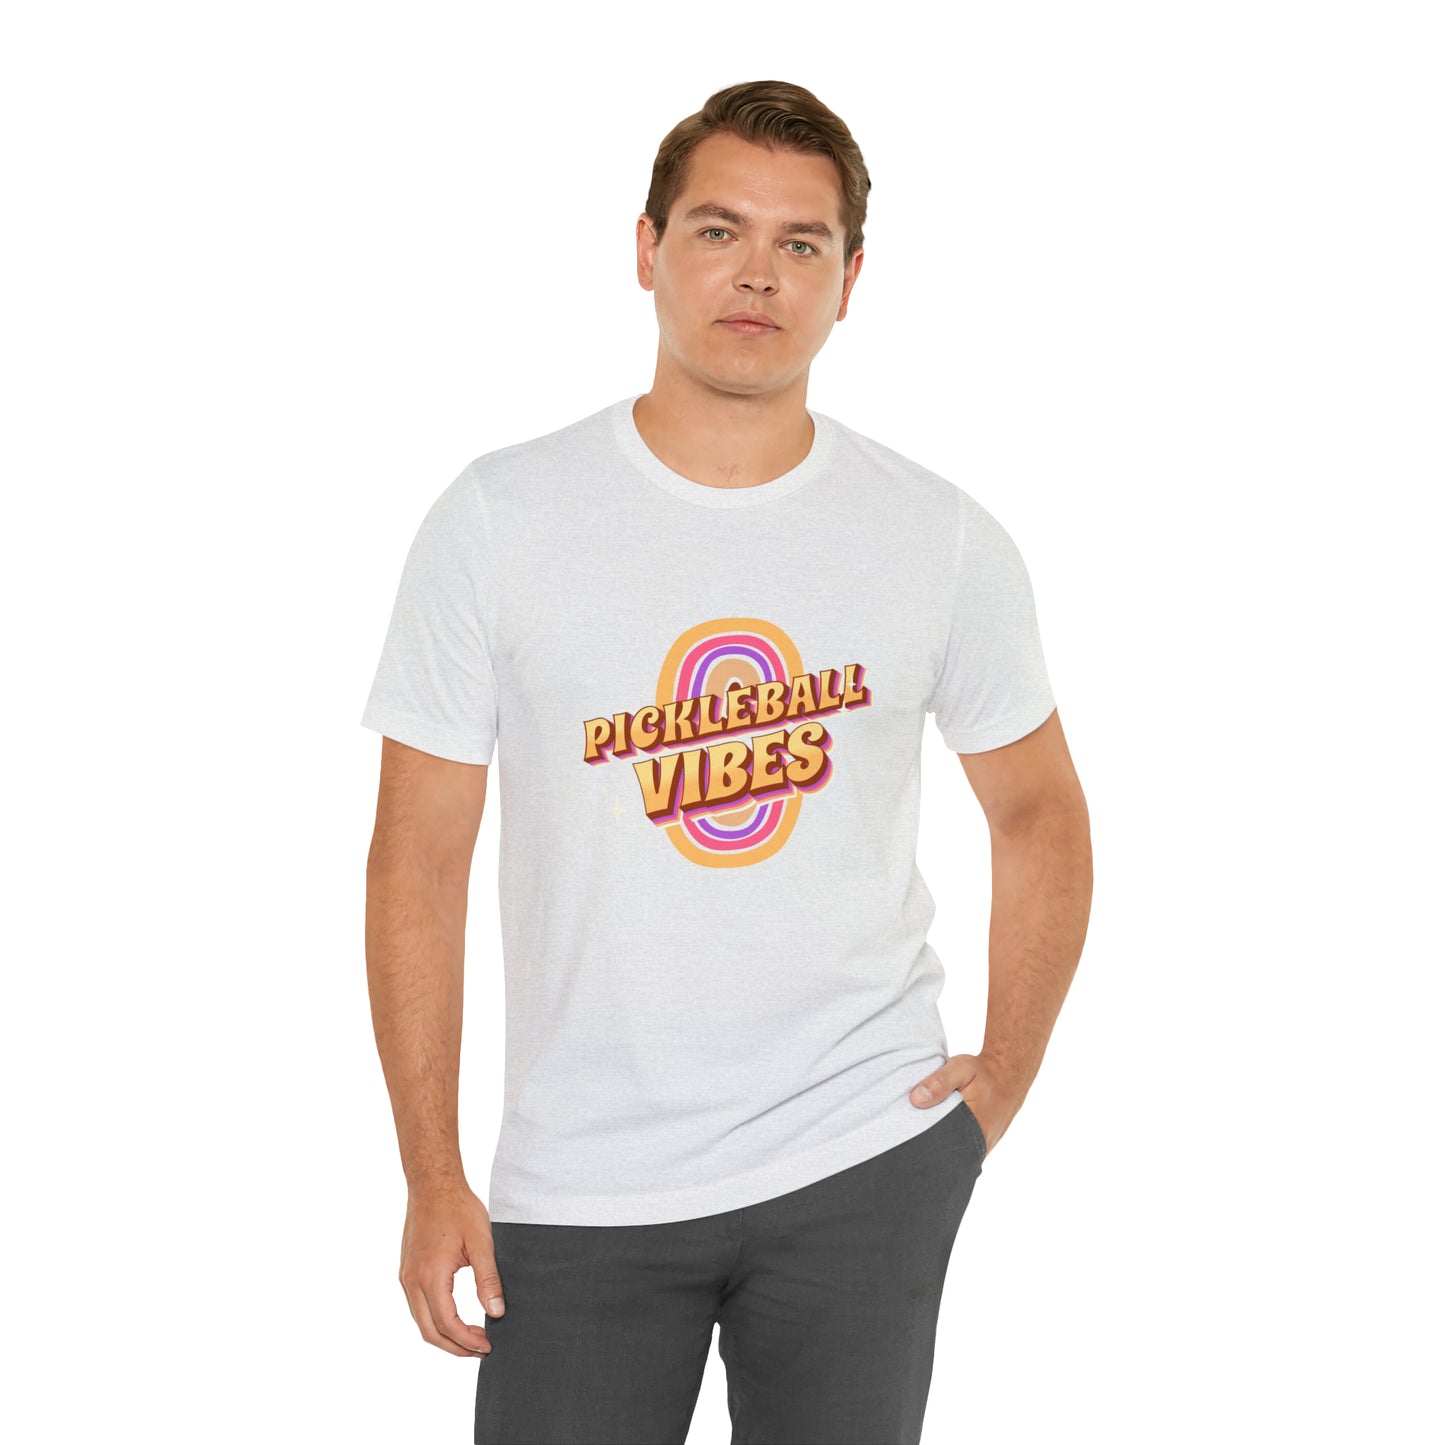 Pickleball Vibes Unisex Jersey Tee - Ultimate Comfort for Pickleball Enthusiasts